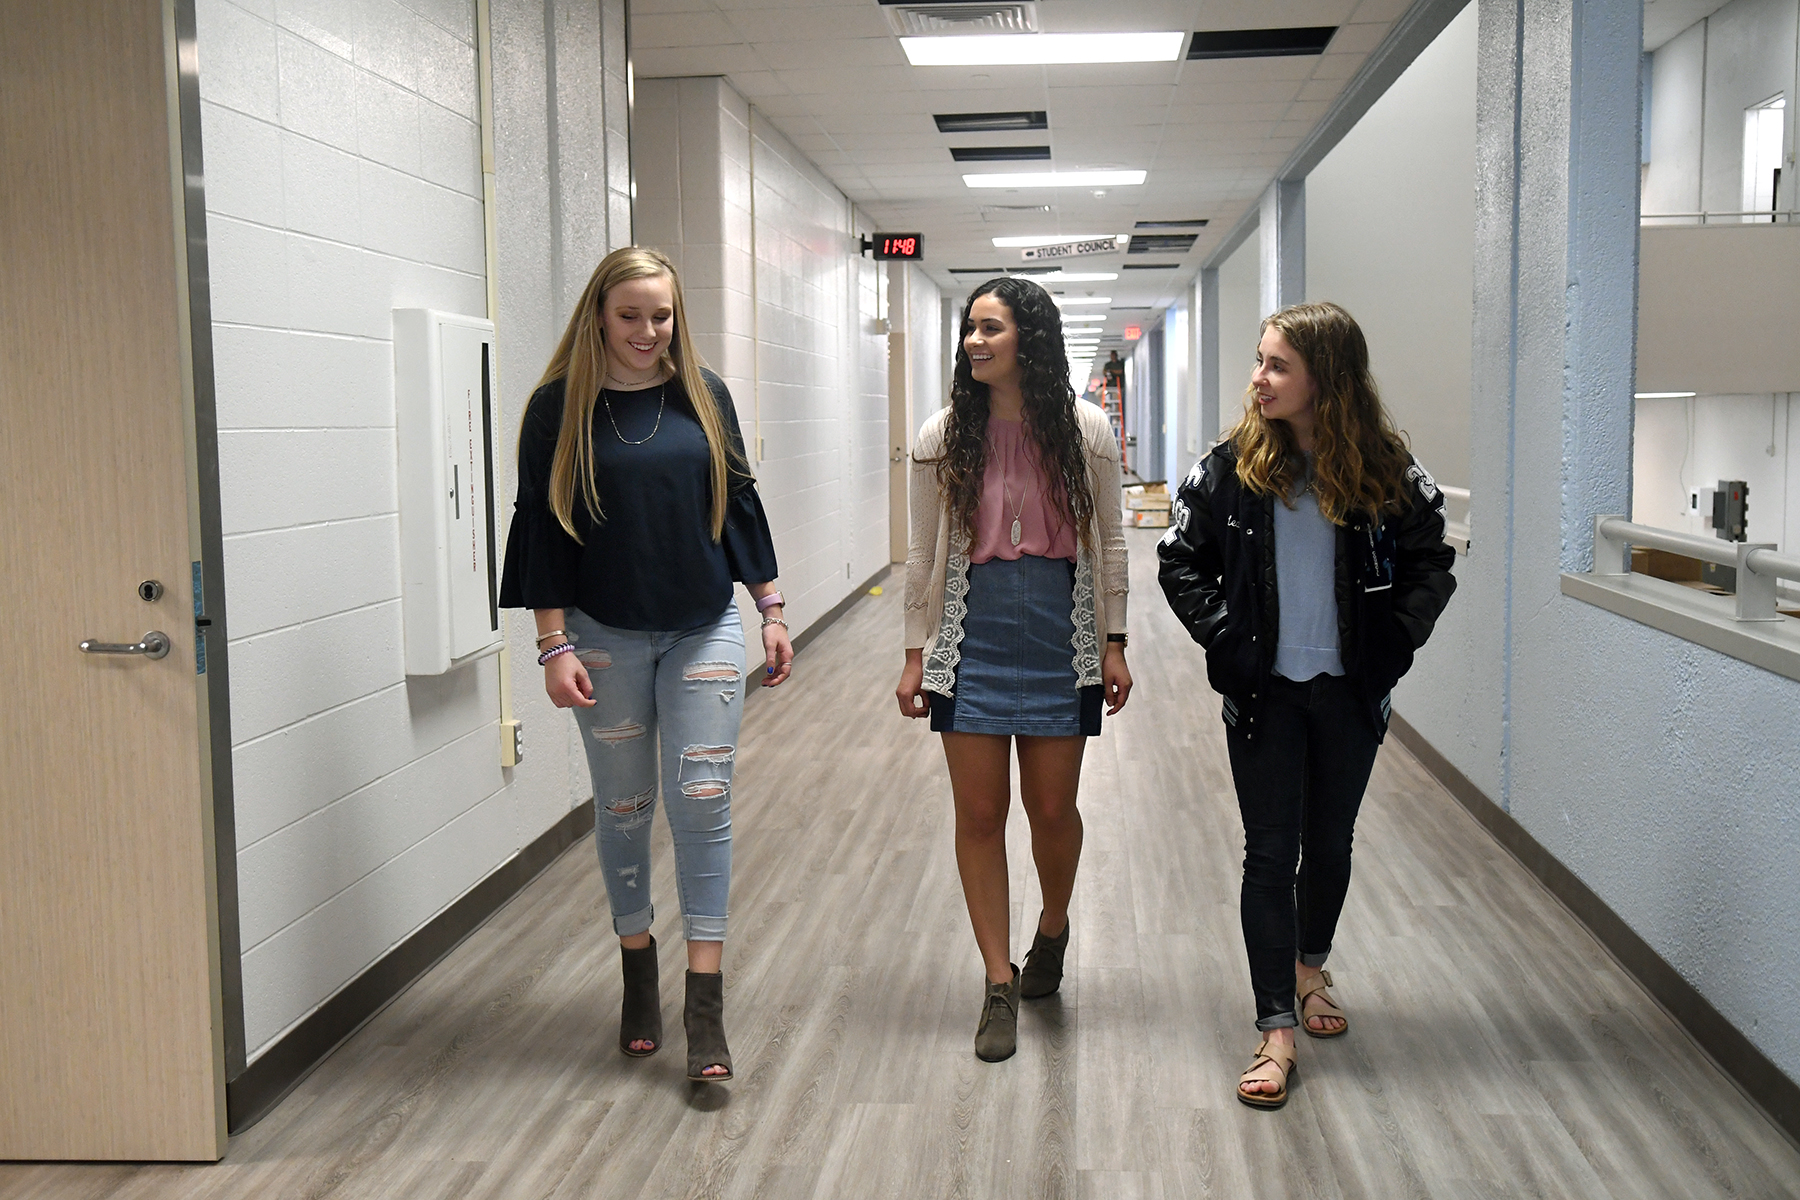 Kingwood High School students excited to return home campus - Houston Chronicle1800 x 1200